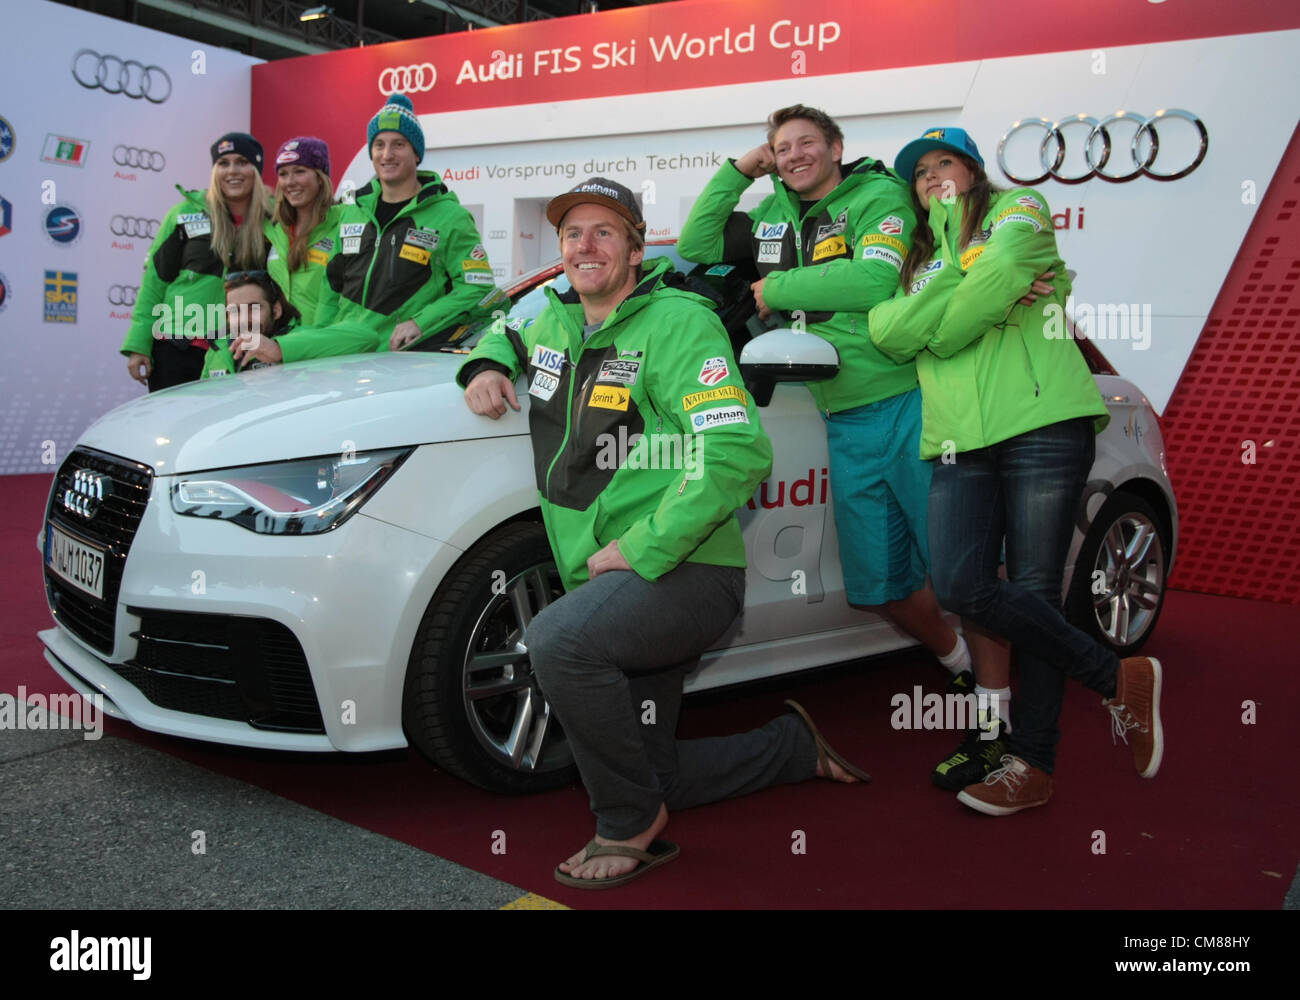 25.10.2012. Soelden, Austria.  In front Ted LIGETY with American ski team in action during the Audi photo shooting FIS Alpine Ski World Cup Solden, Austria 2012-2013 Stock Photo